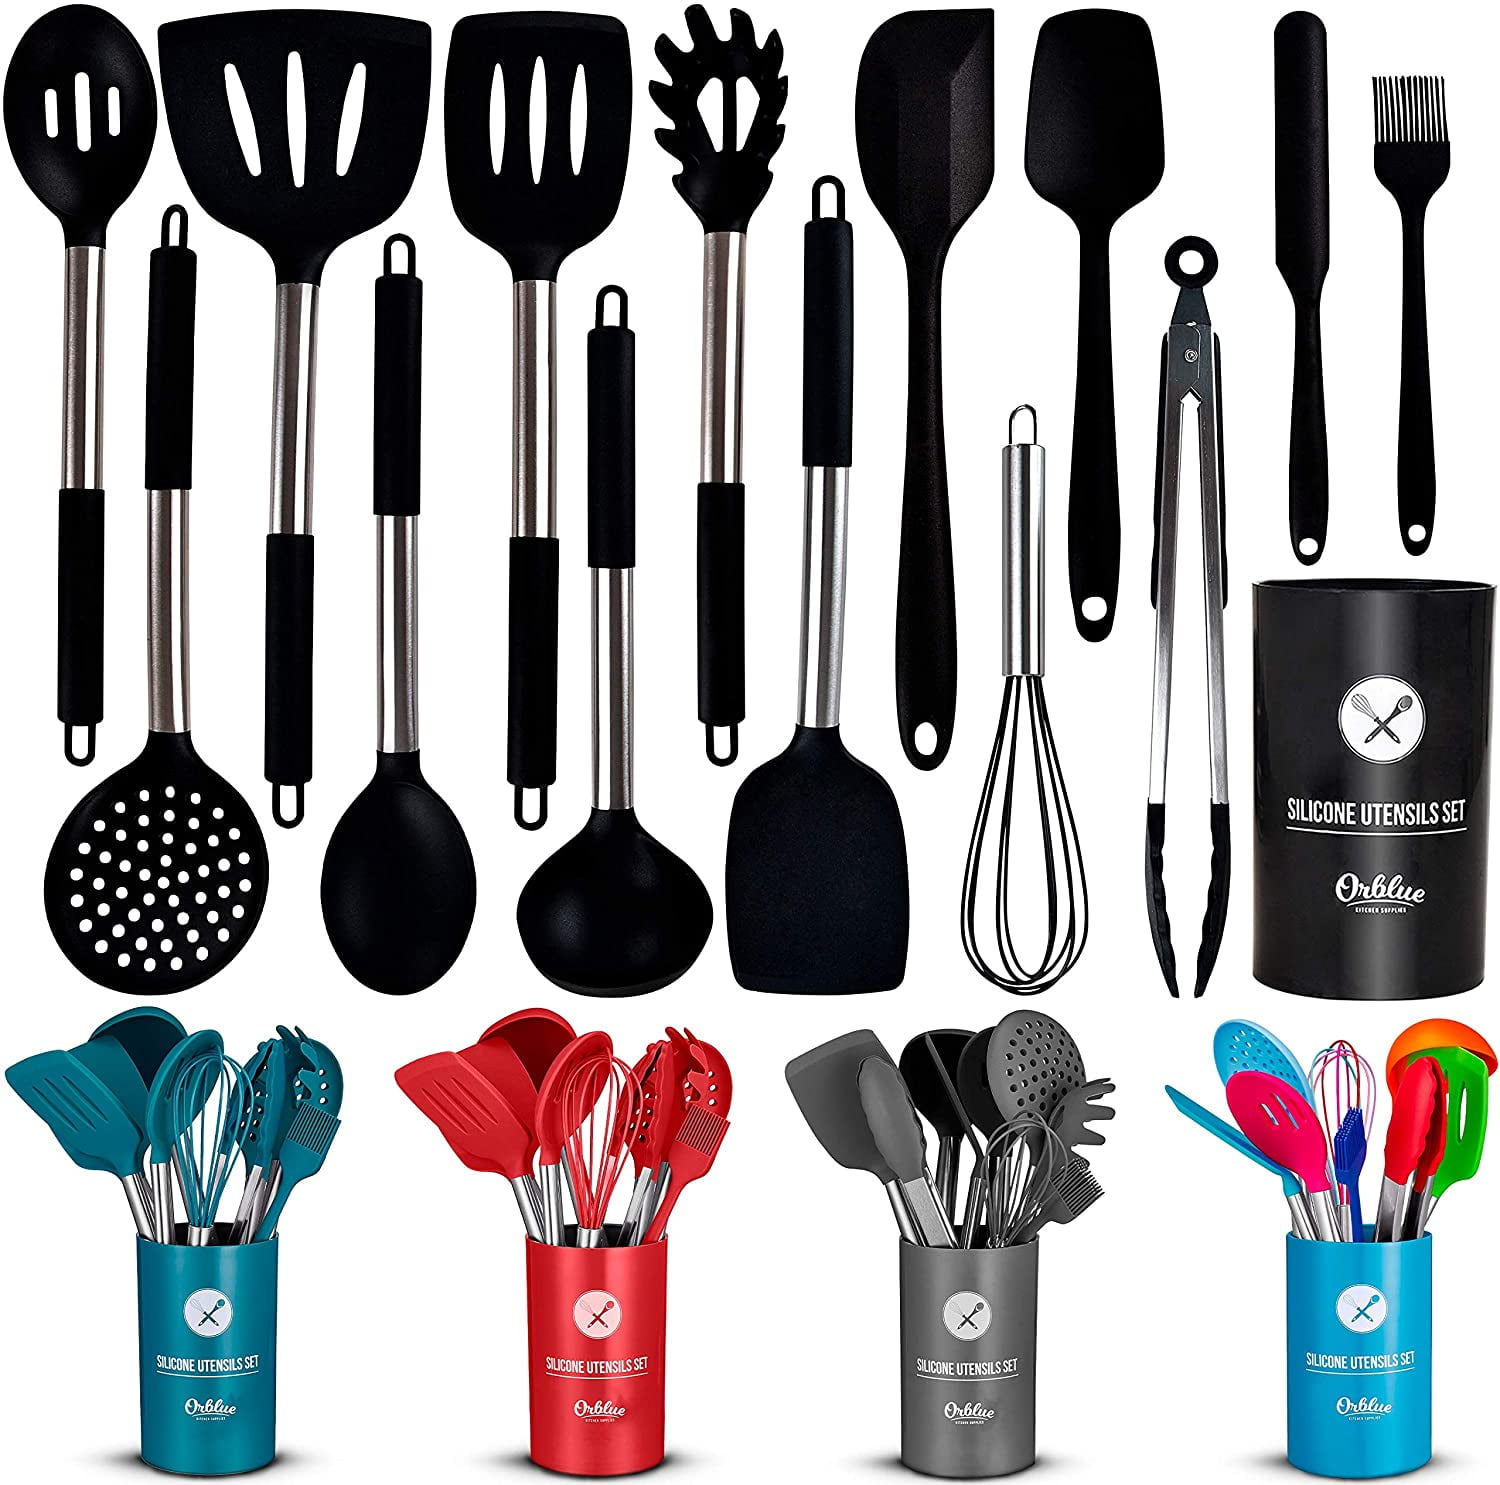 Heat-resistant Covering Handle Kitchenware Utensils Set Silicone